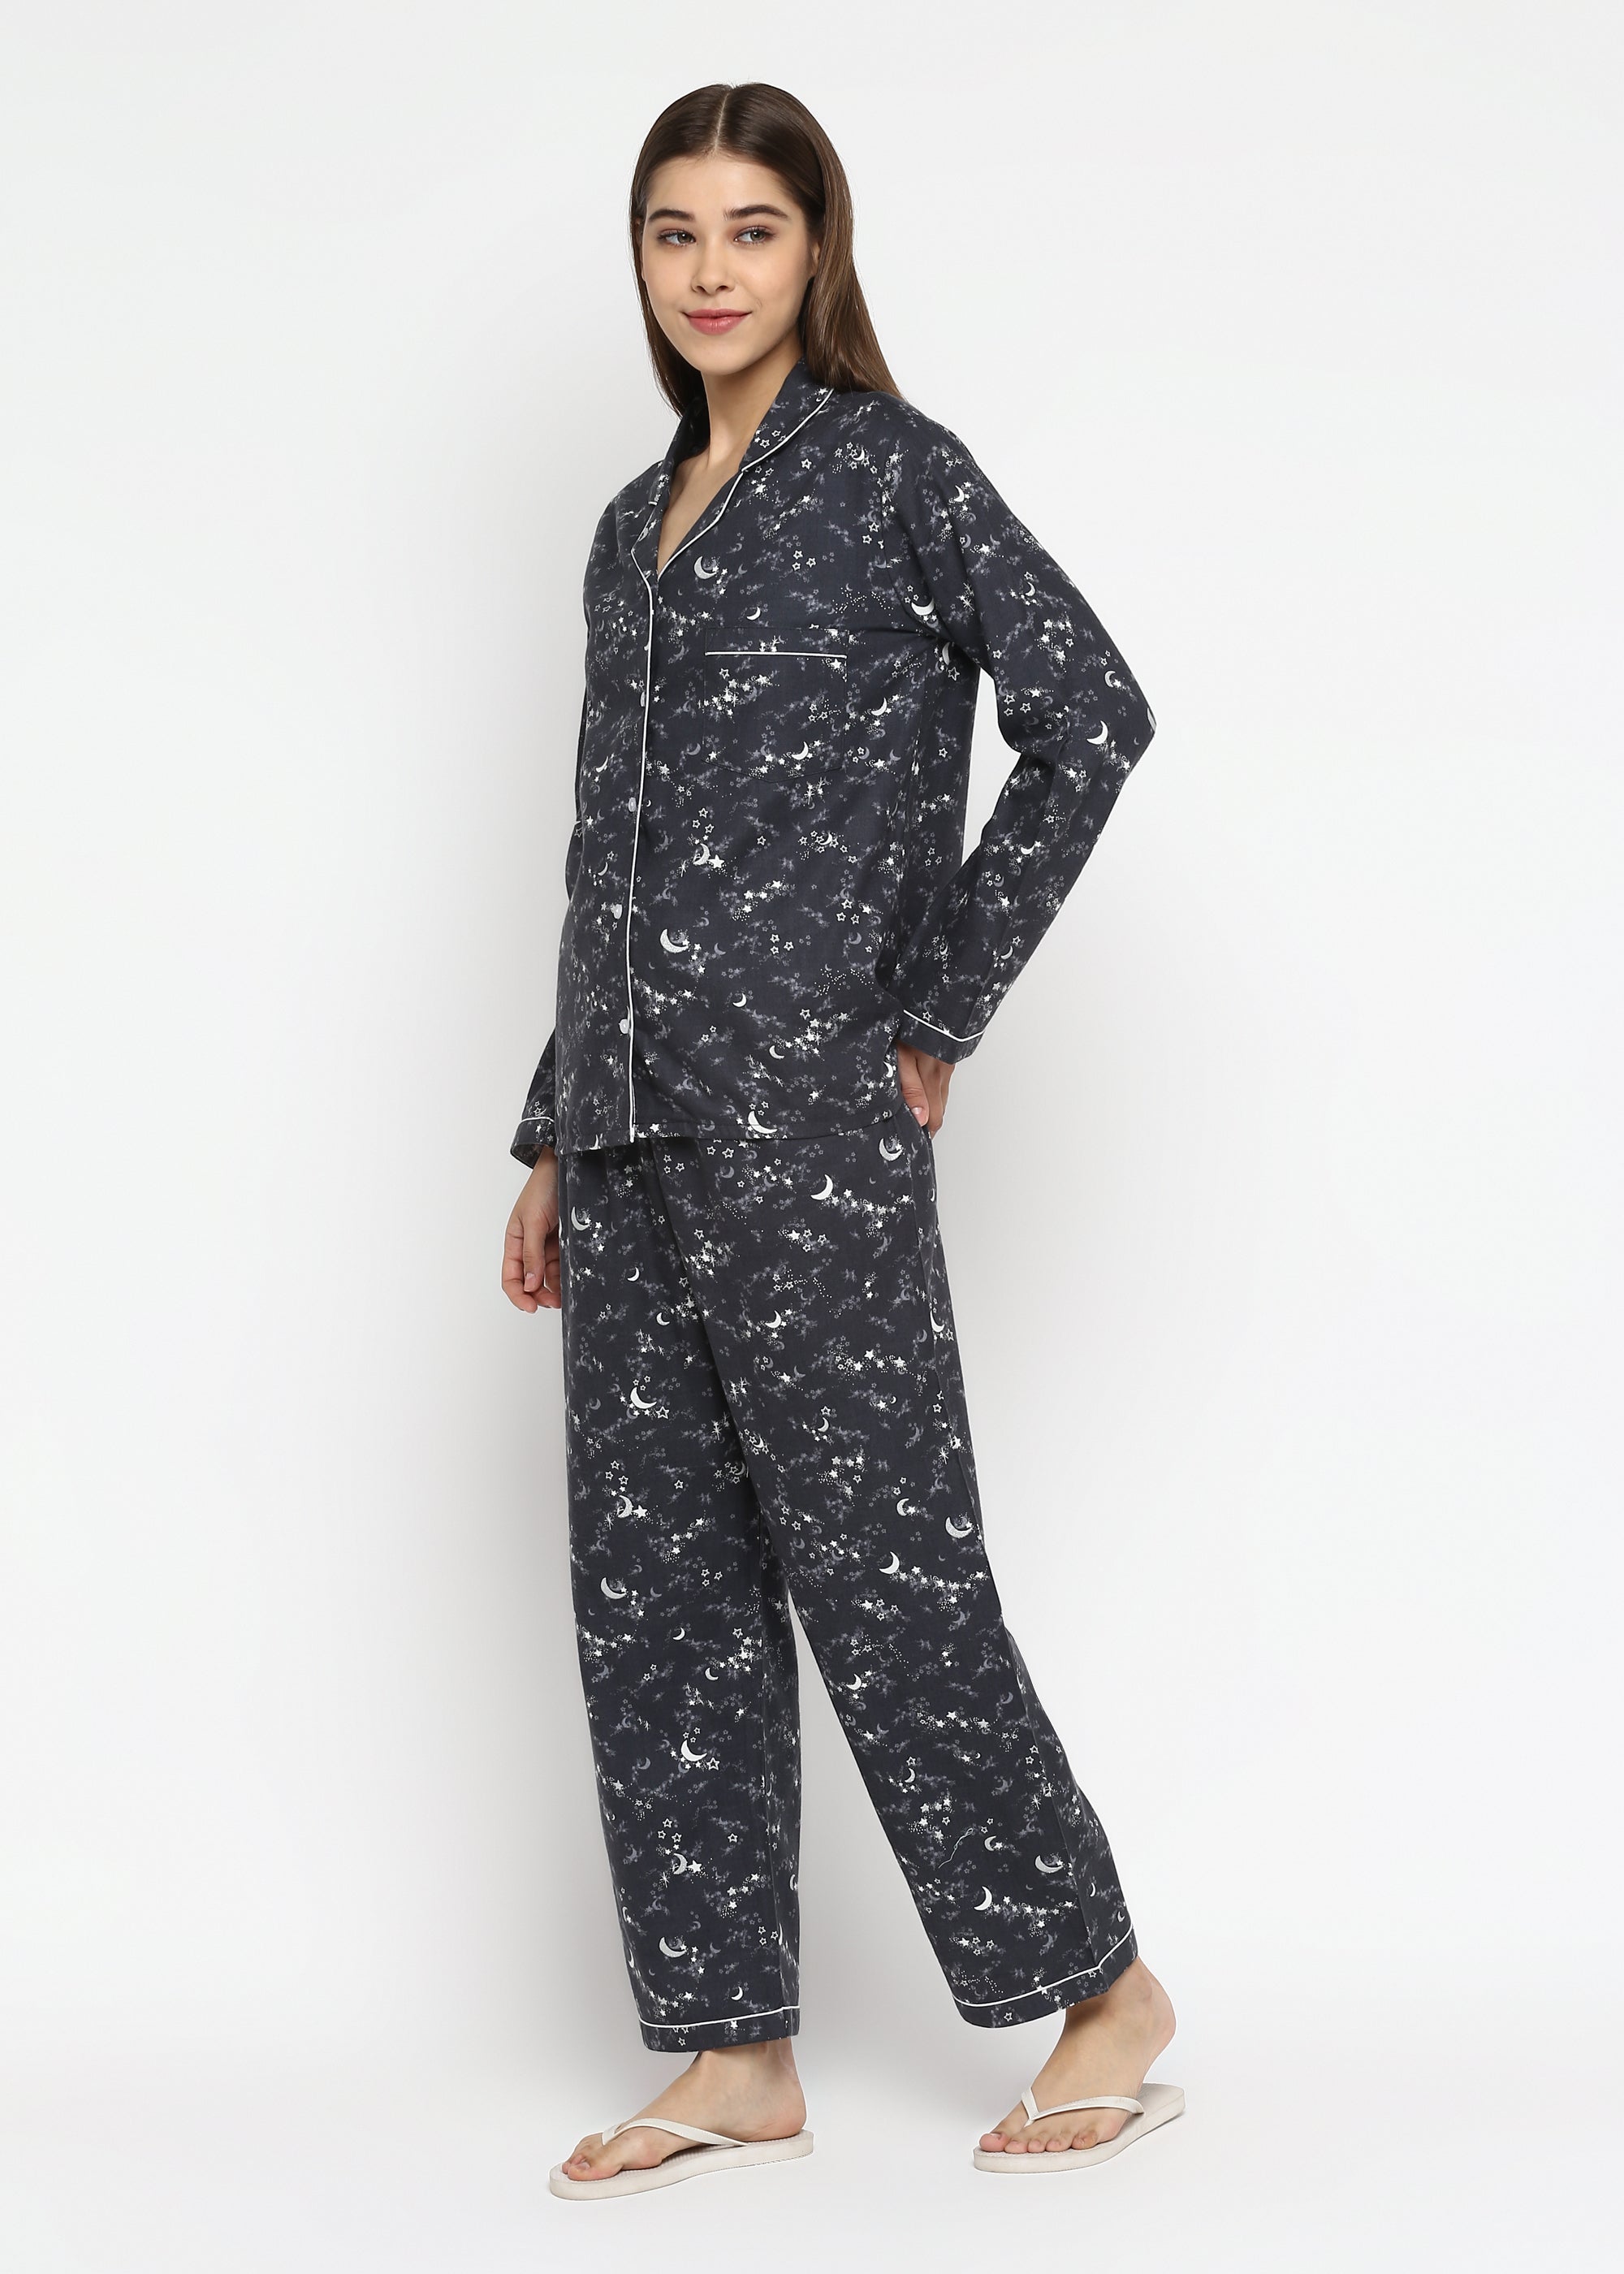 Grey Star and Moon Print Cotton Flannel Long Sleeve Women's Night Suit - Shopbloom